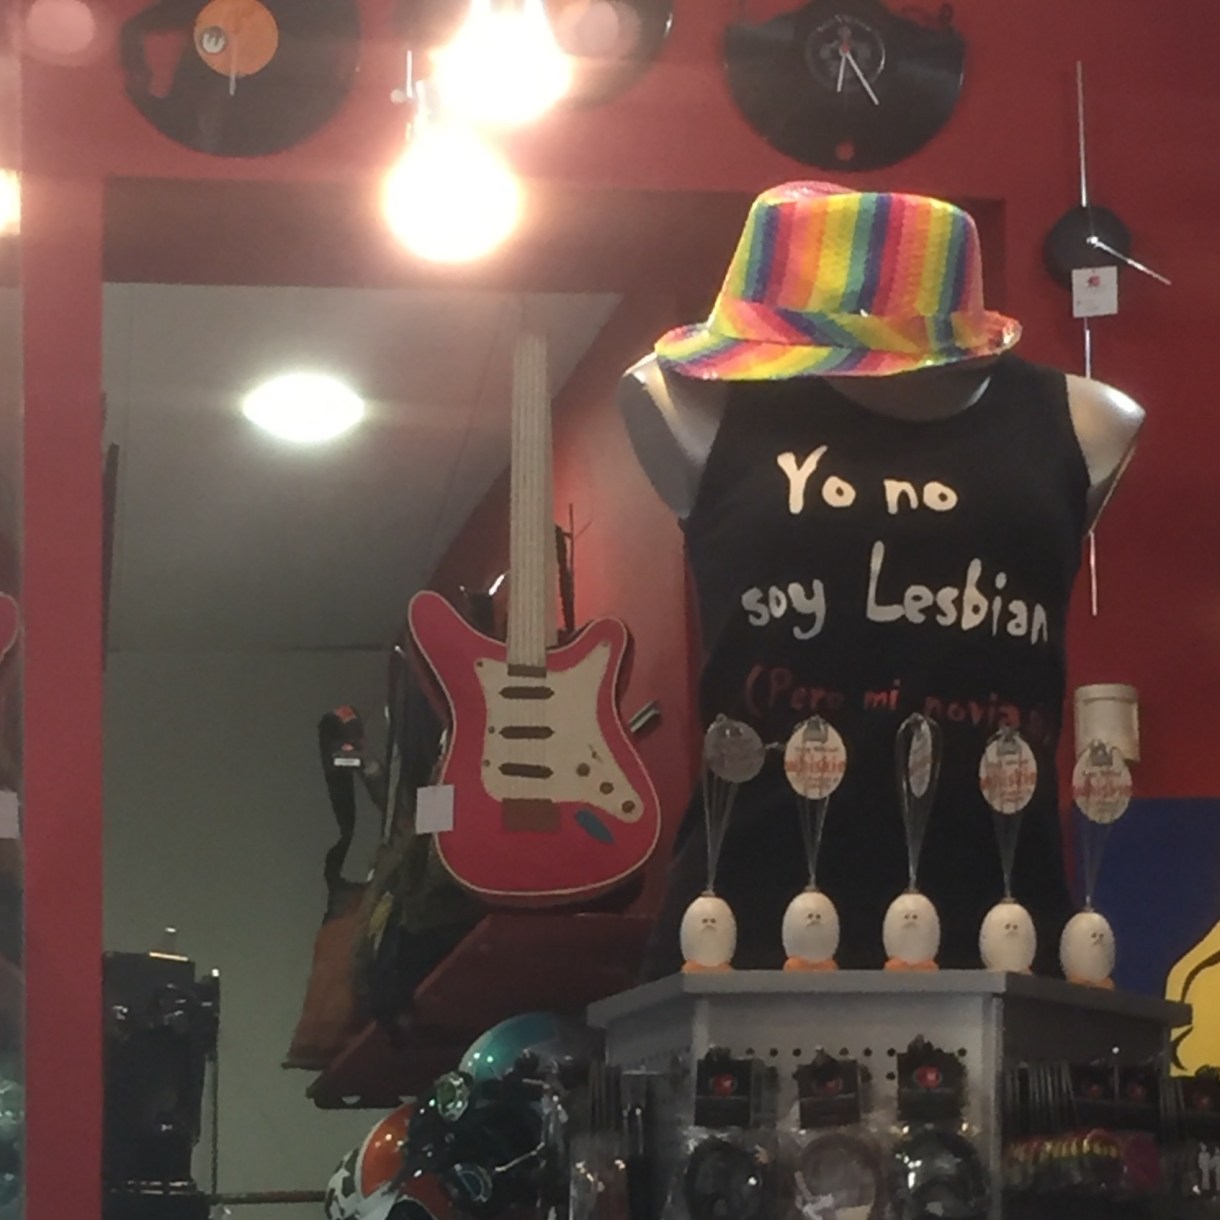 Found some cool fashion - translates to “I’m not a lesbian but my girlfriend is